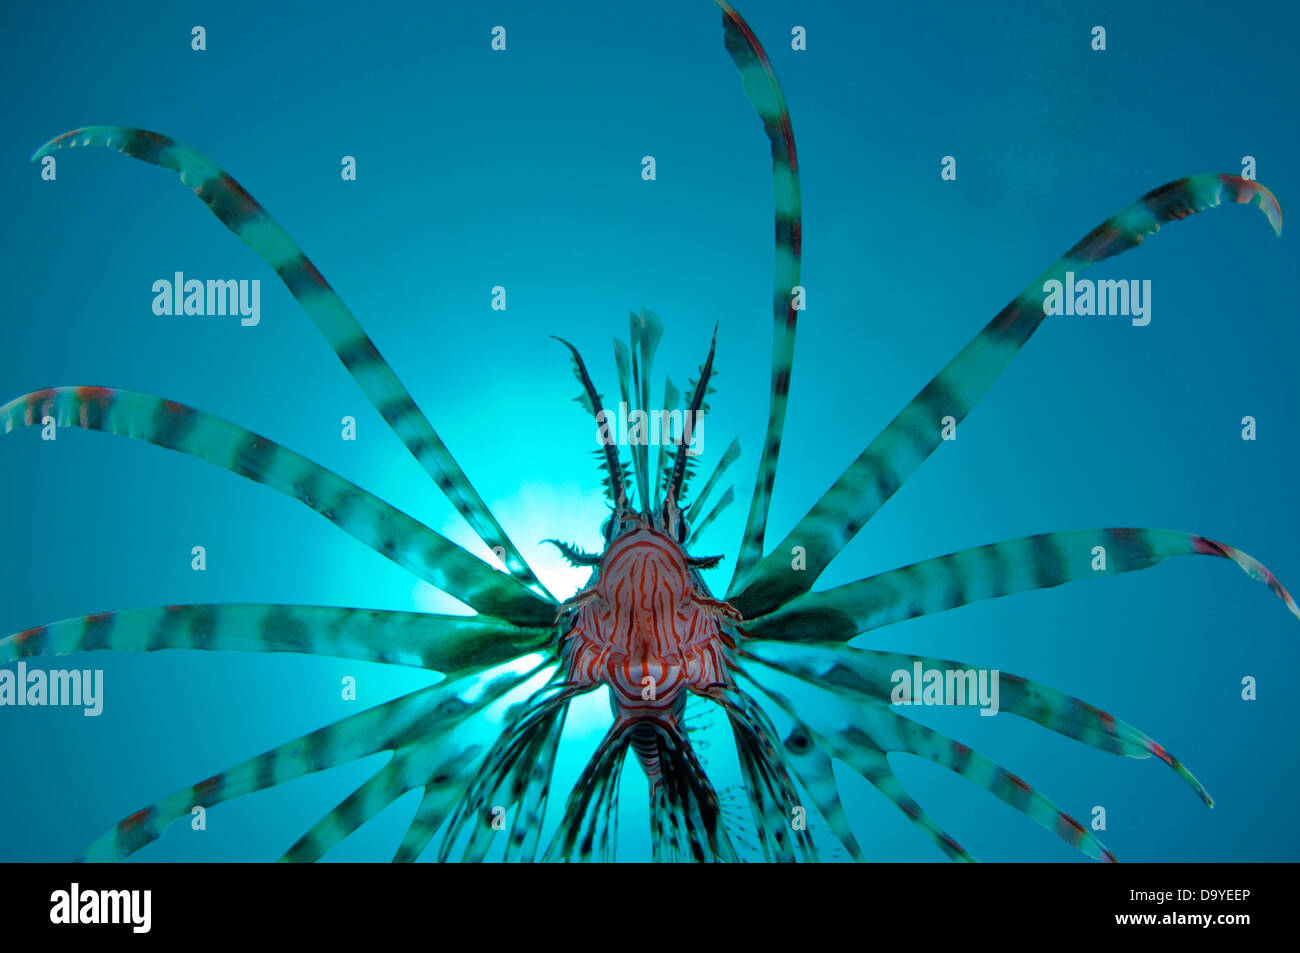 Common lionfish (Pterois volitans) swimming underwater, Lembeh Strait, Sulawesi, Indonesia Stock Photo